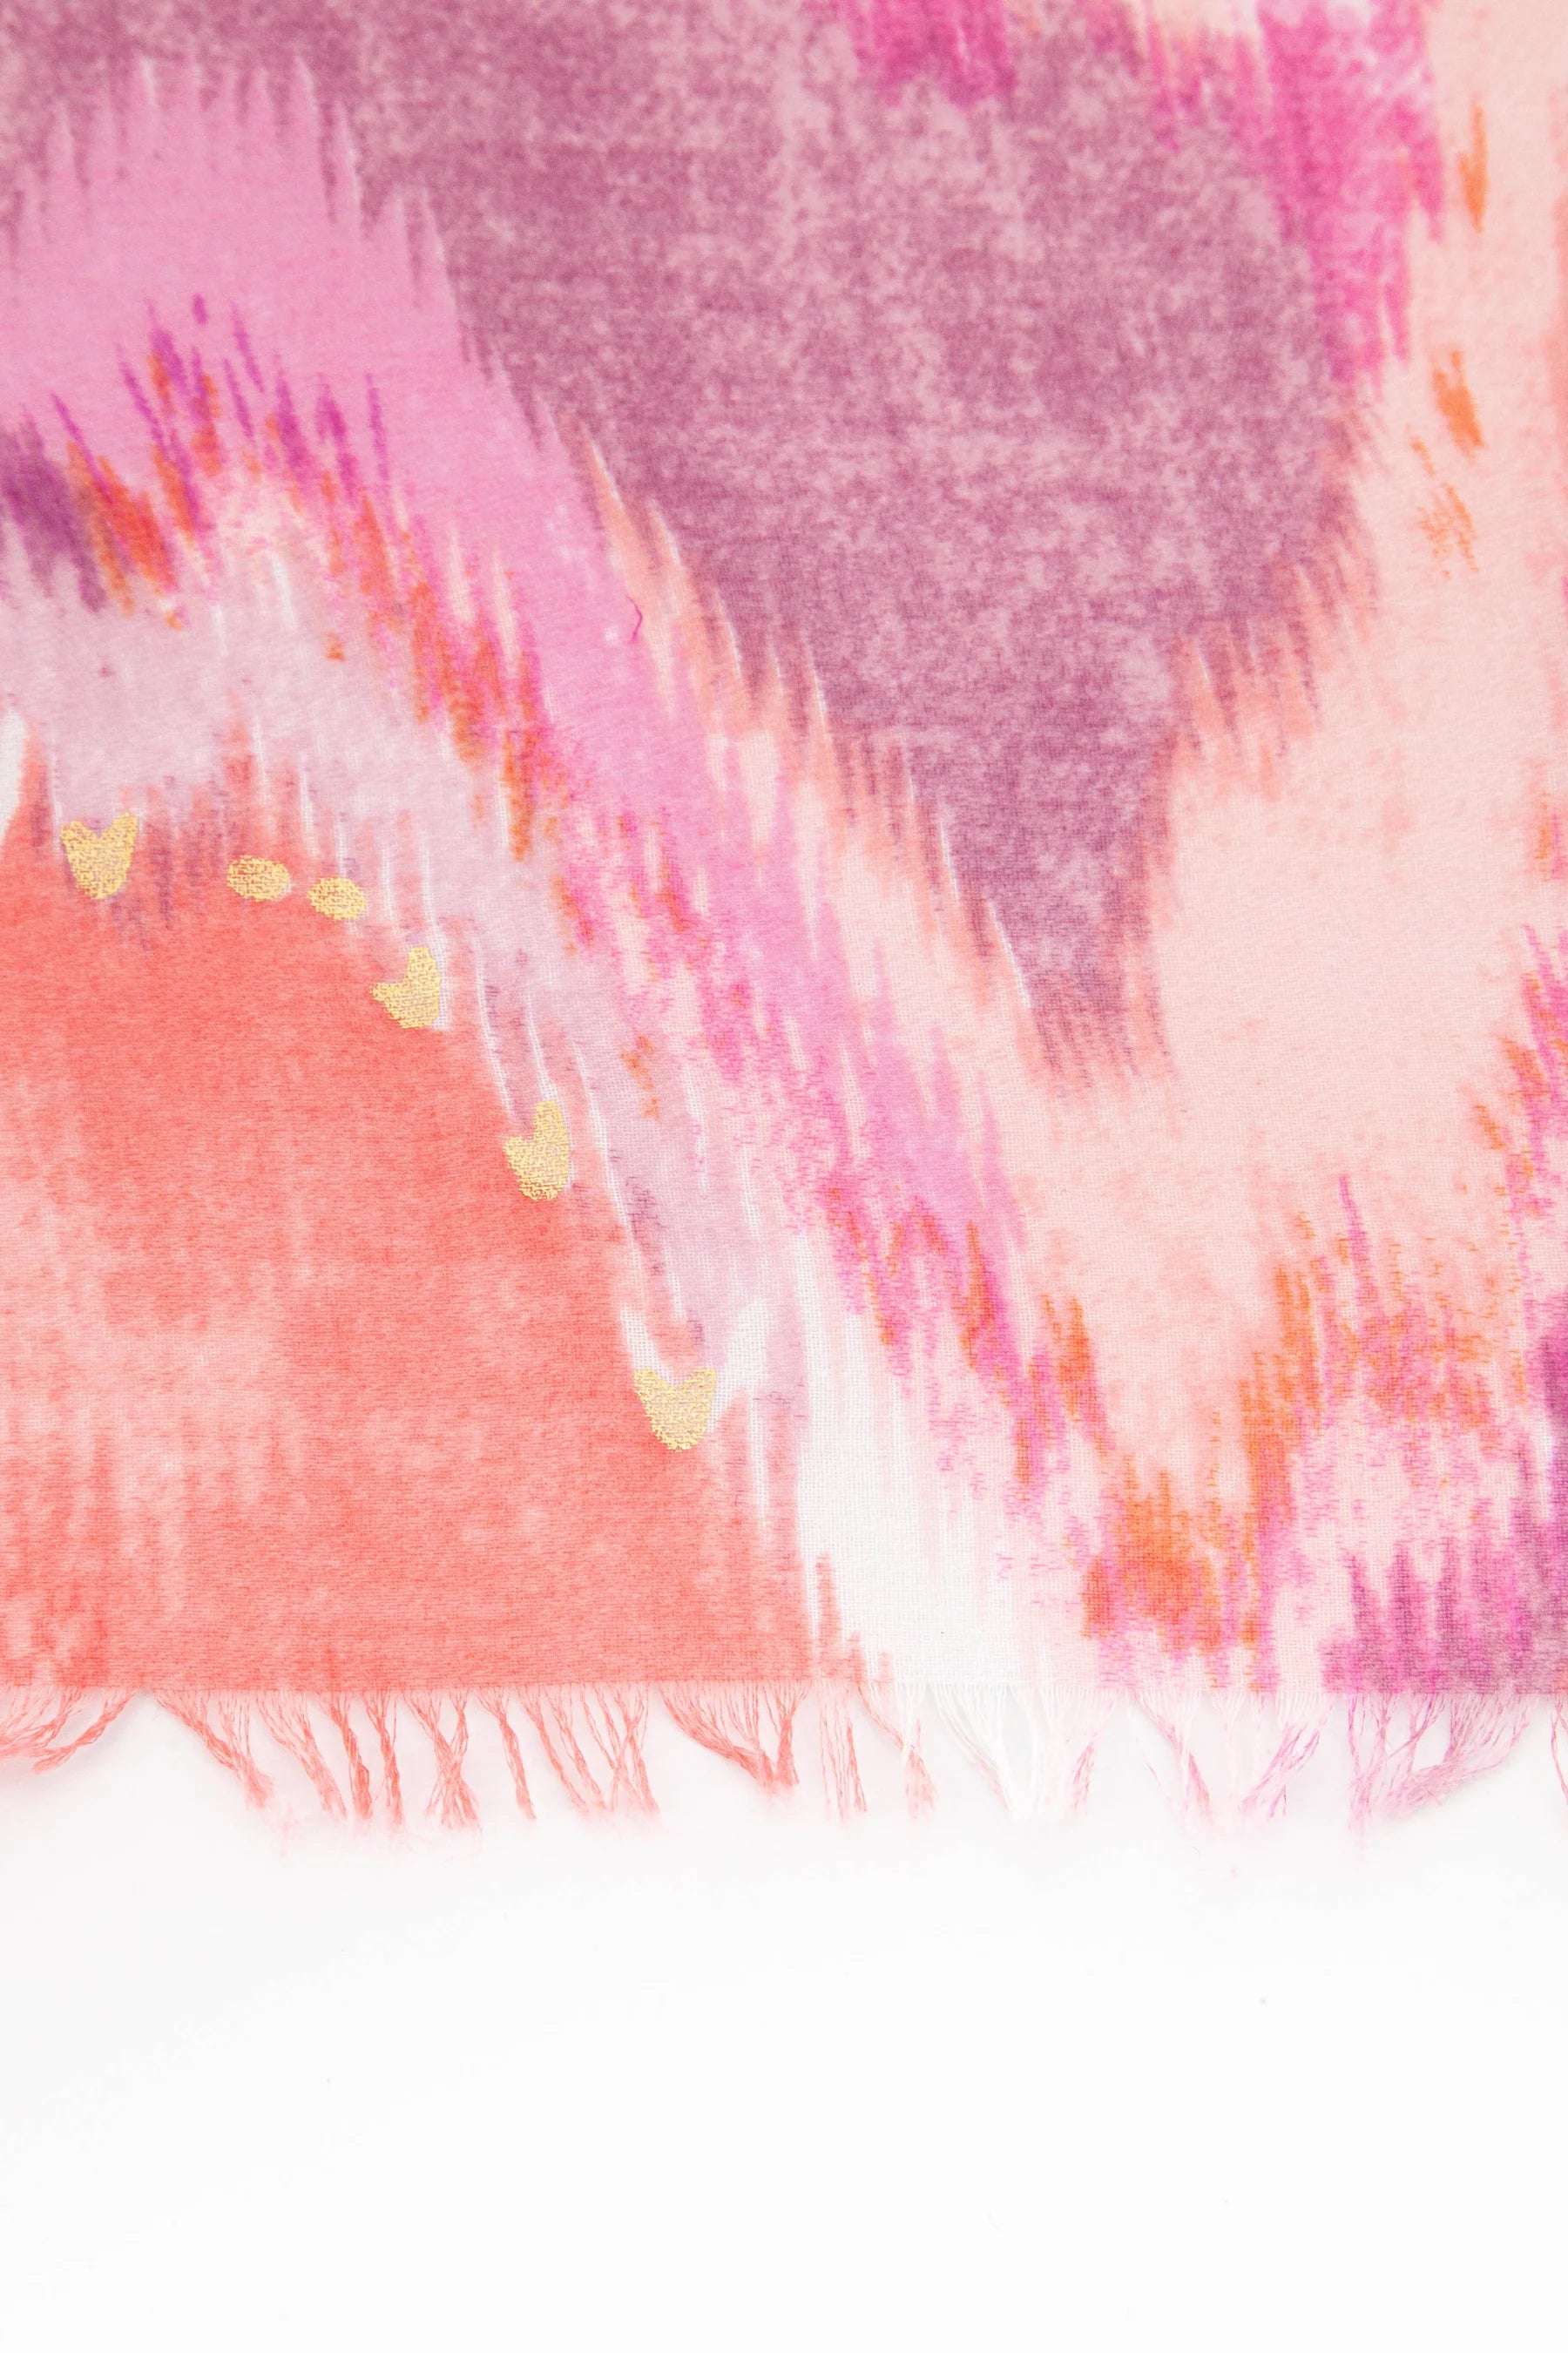 Wave Print Scarf with Gold Highlights in Pink